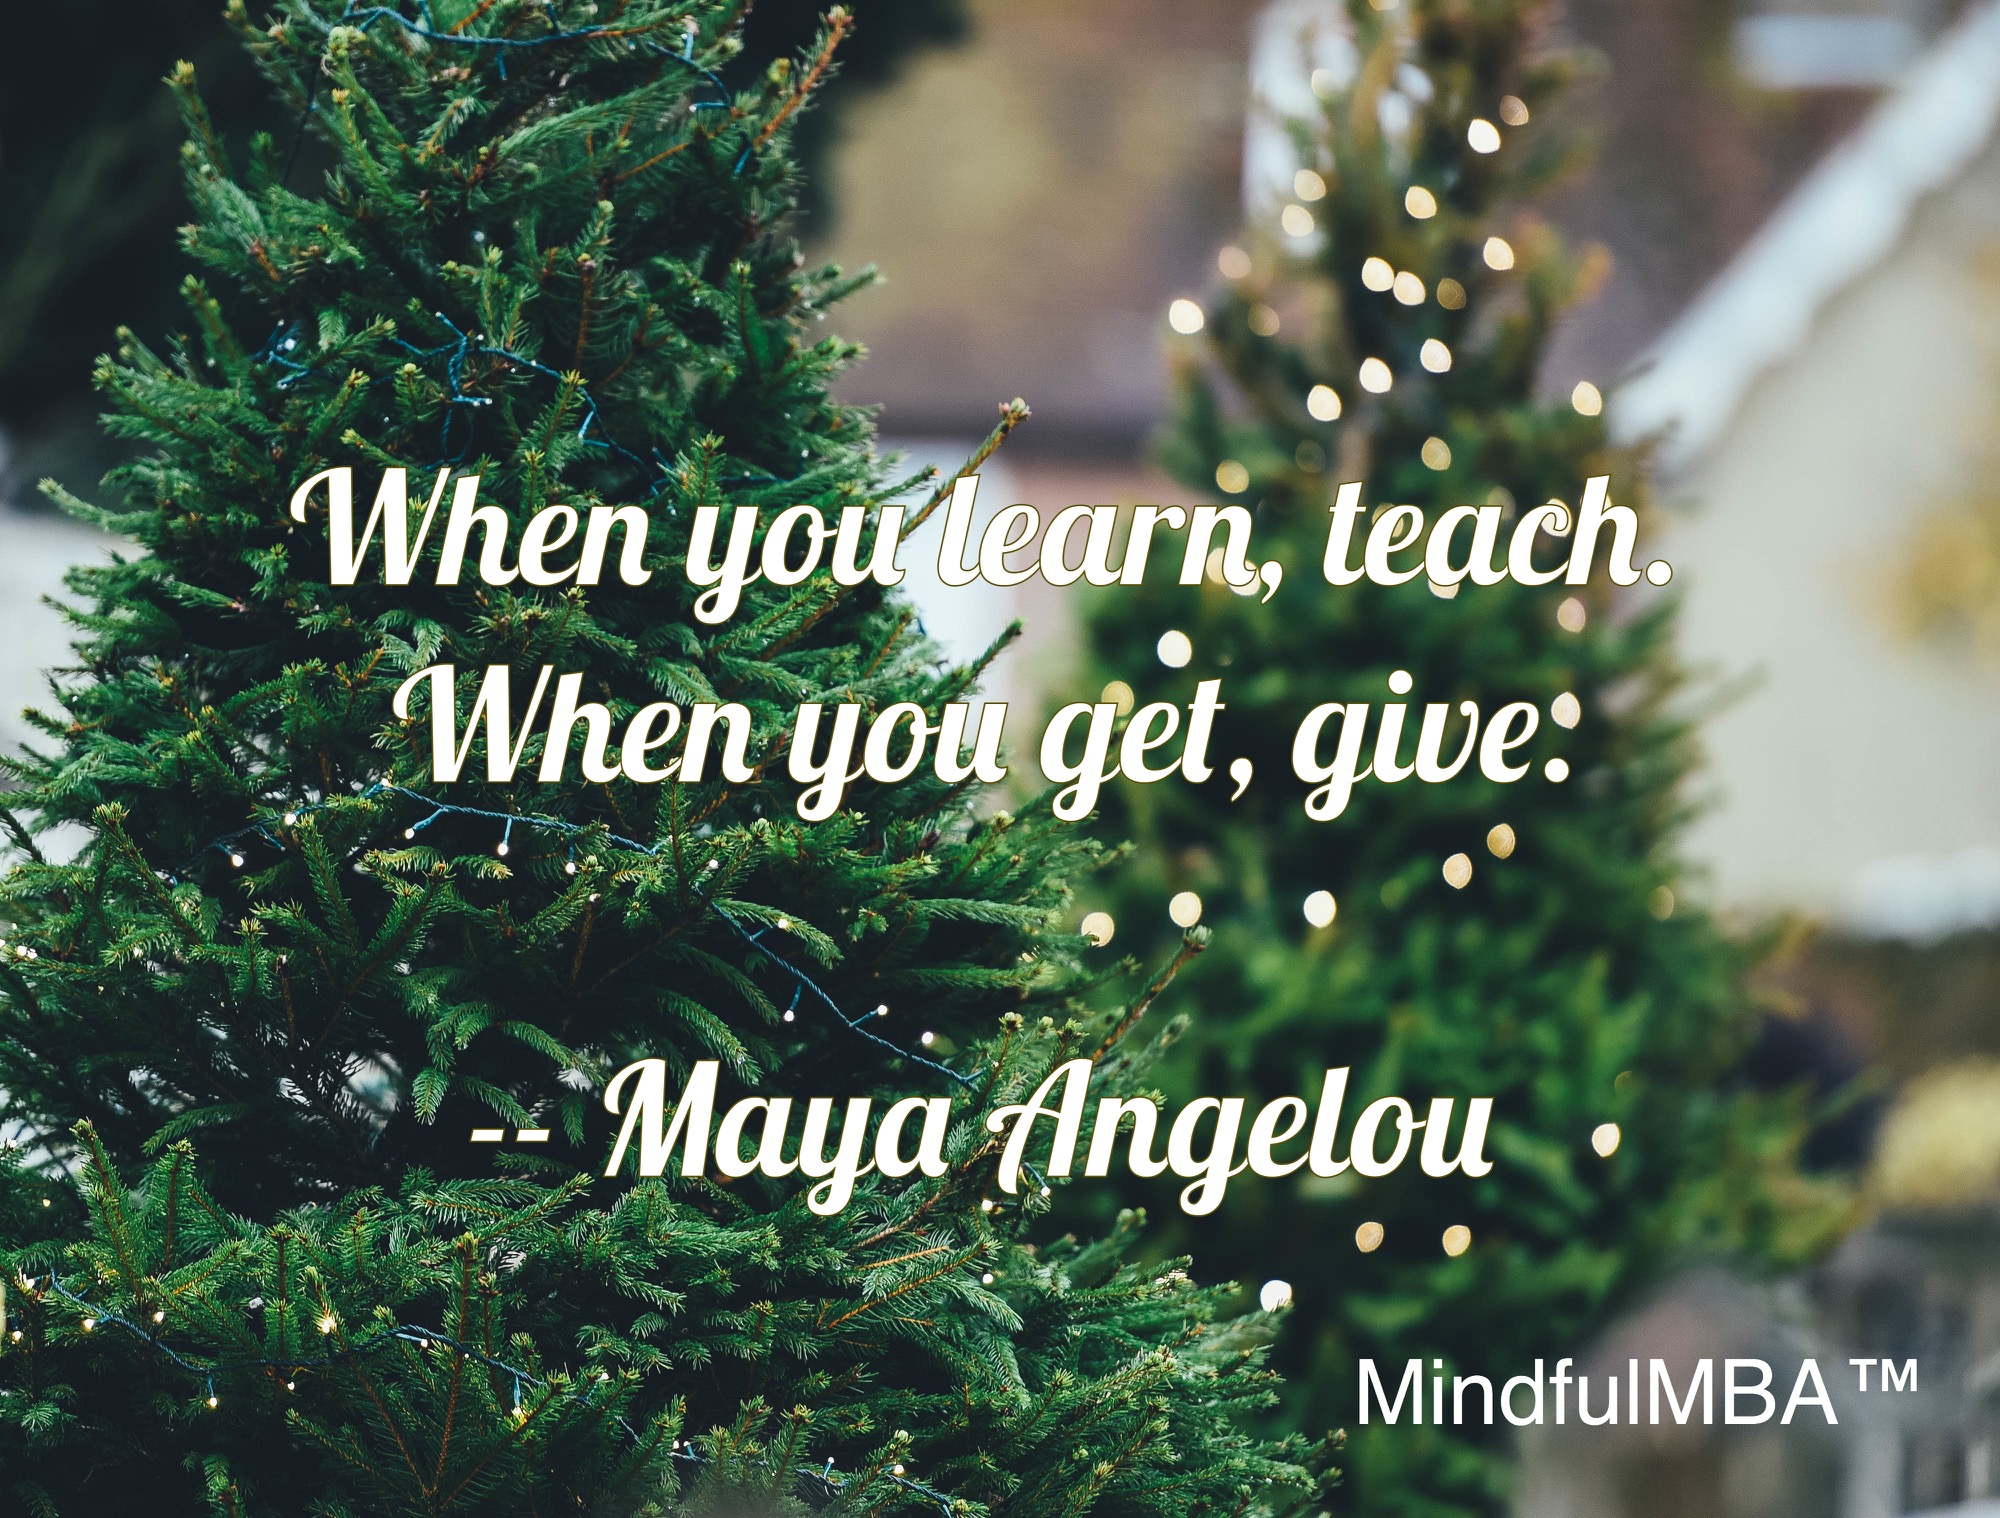 Maya Angelou_GiveTeach quote w tag